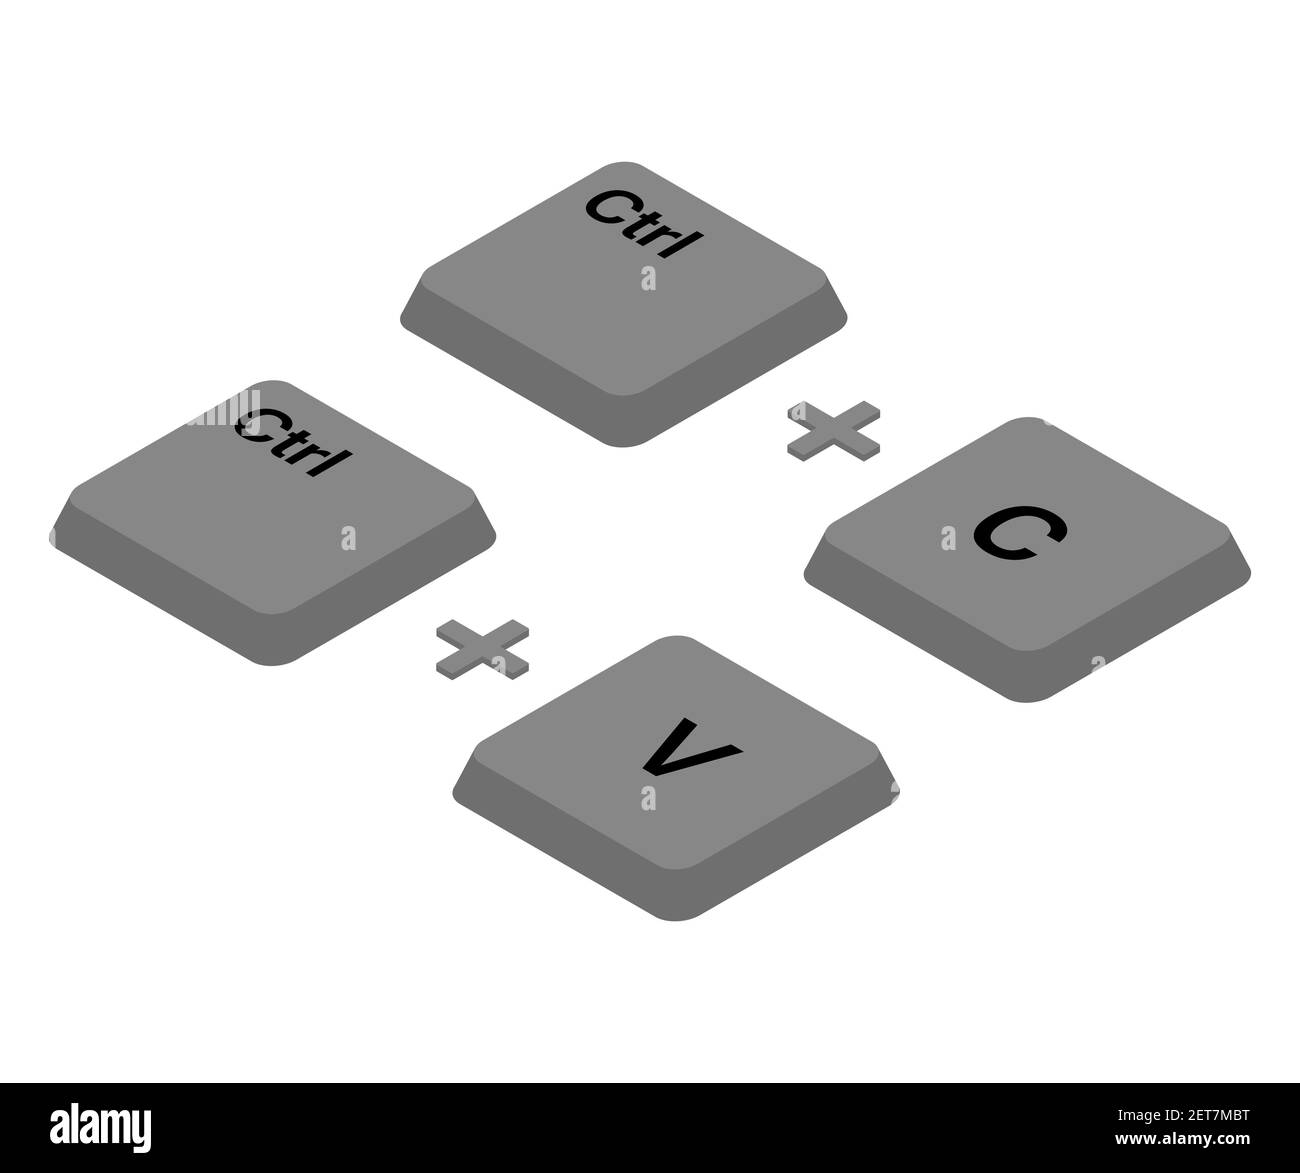 Copy paste keyboard shortcut hi-res stock photography and images - Alamy